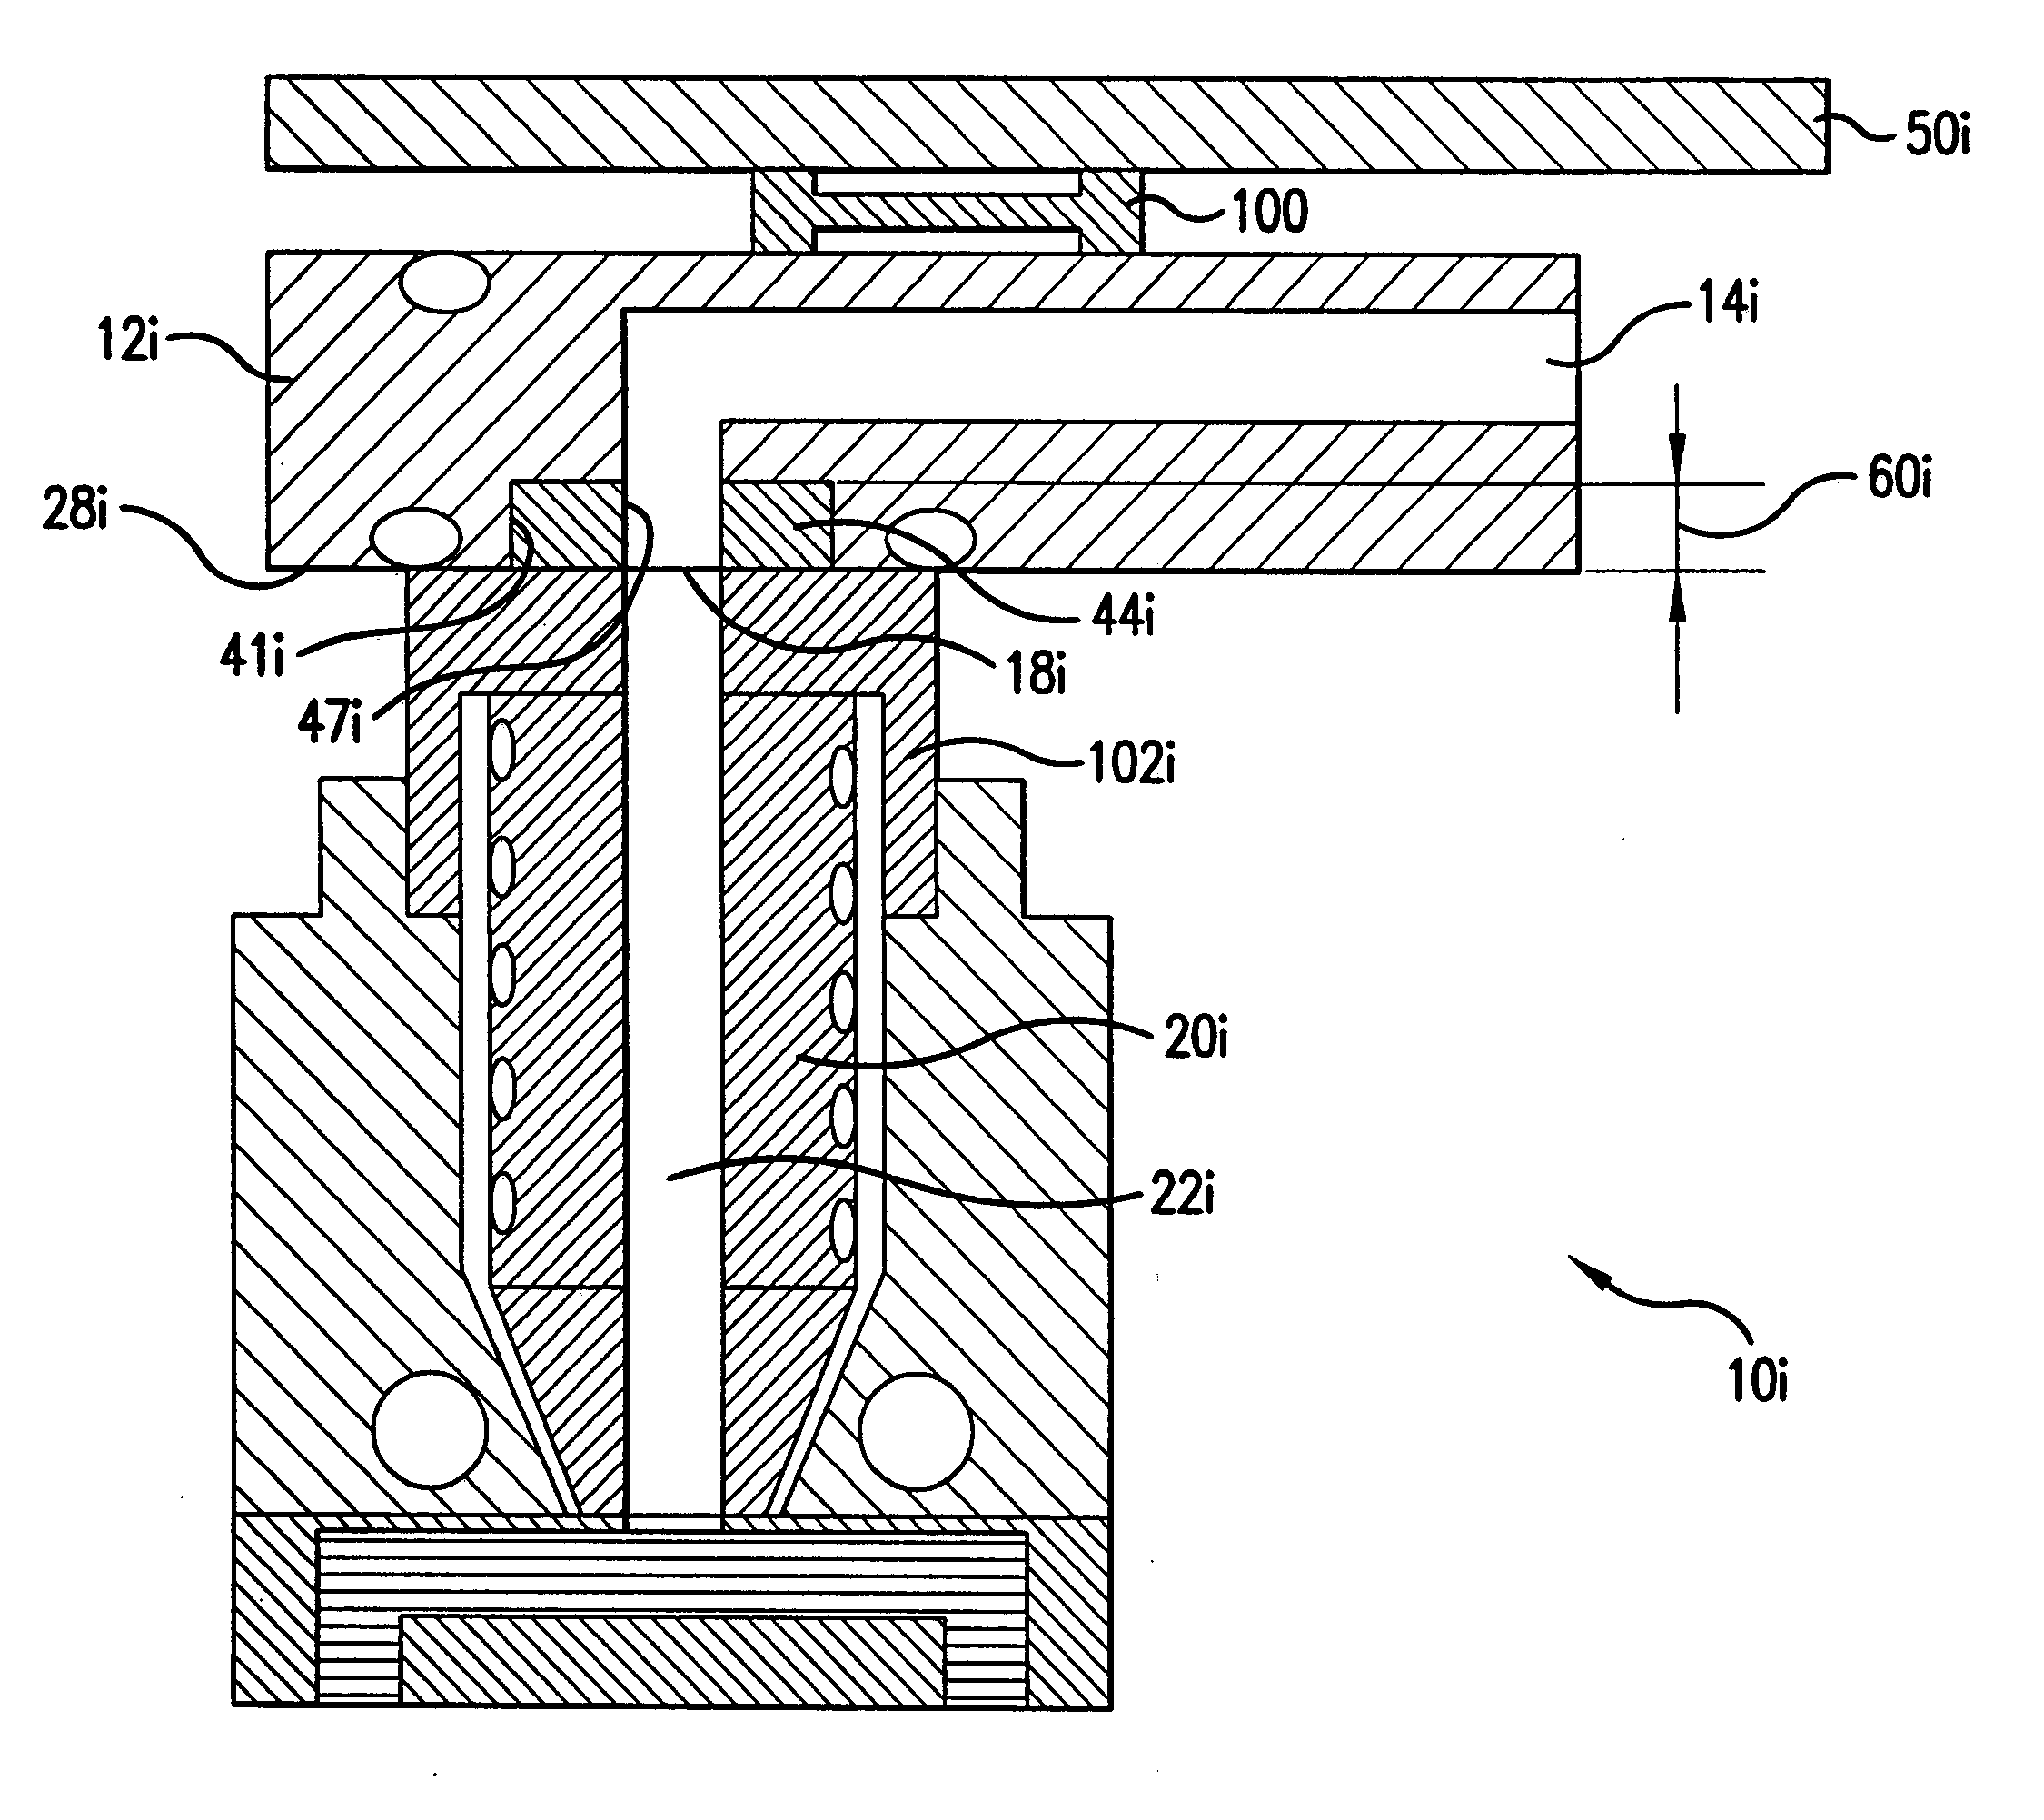 Thermal seal between manifold and nozzle